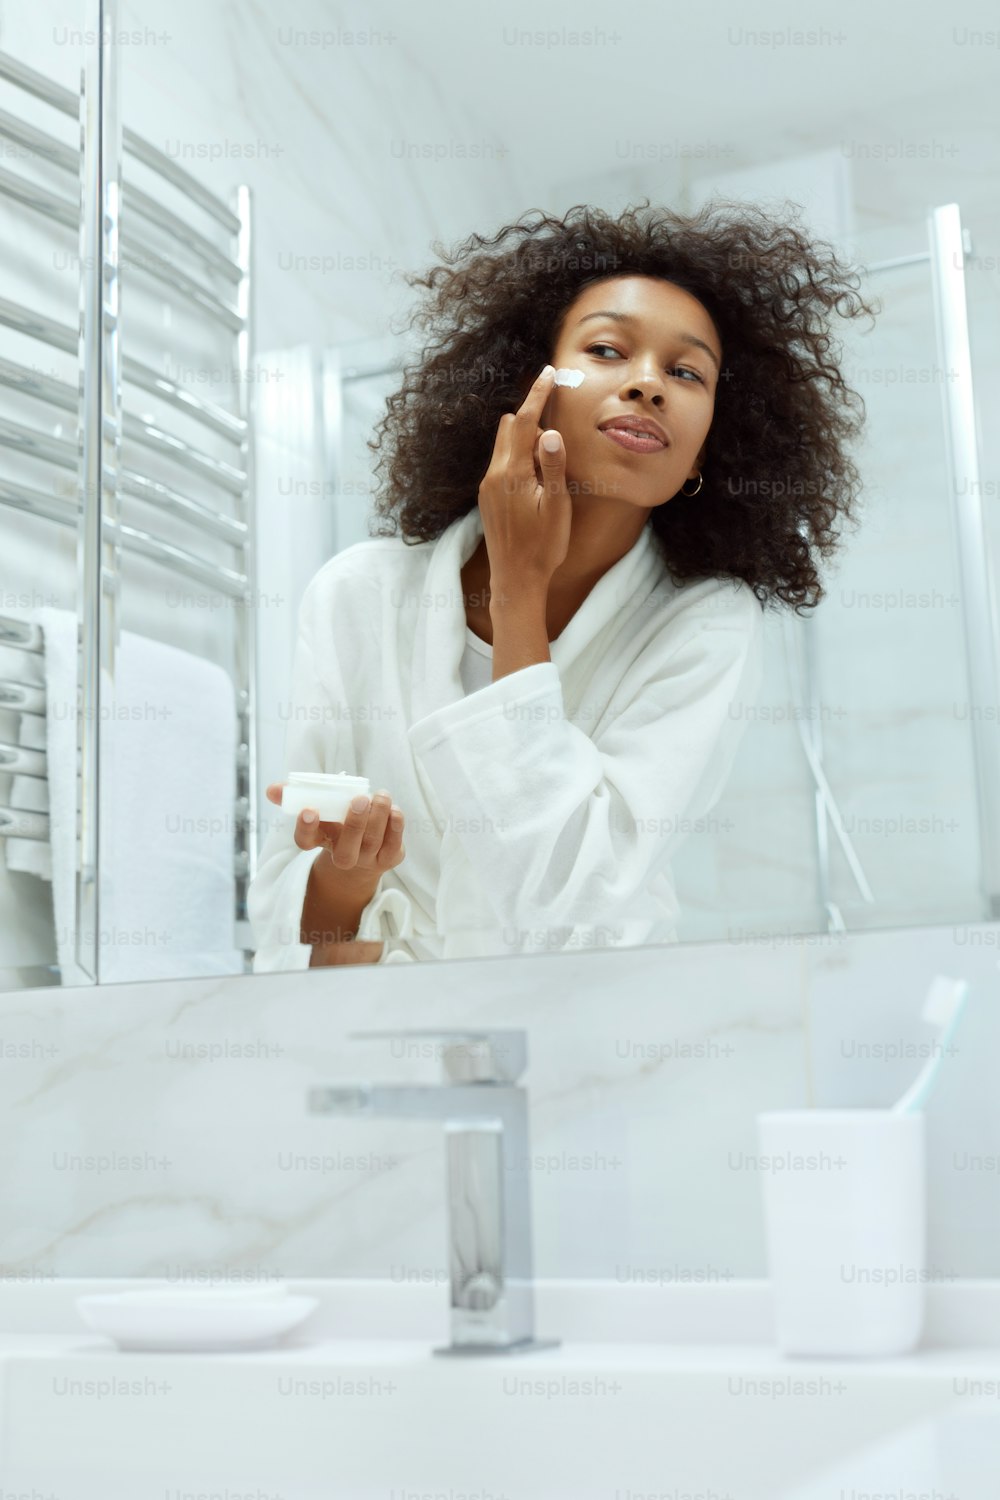 Skin care. Woman applying cosmetic cream on face looking in mirror at bathroom. Portrait of african girl with natural makeup, clean facial skin applying moisturizing lotion